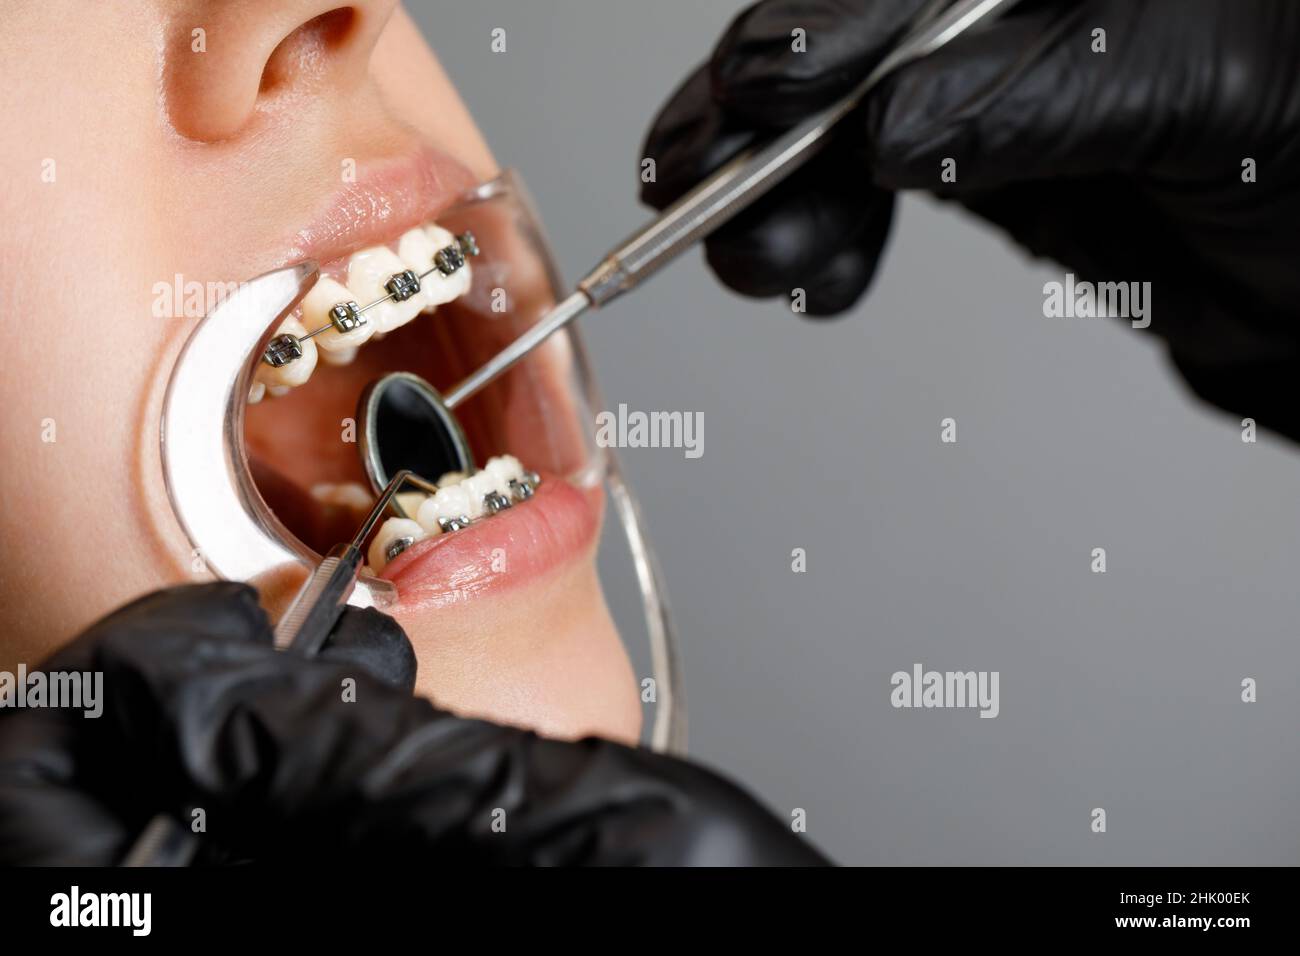 Man's mouth with braces and rubber correction strings on dental hooks  fixing position of teeth Stock Photo - Alamy